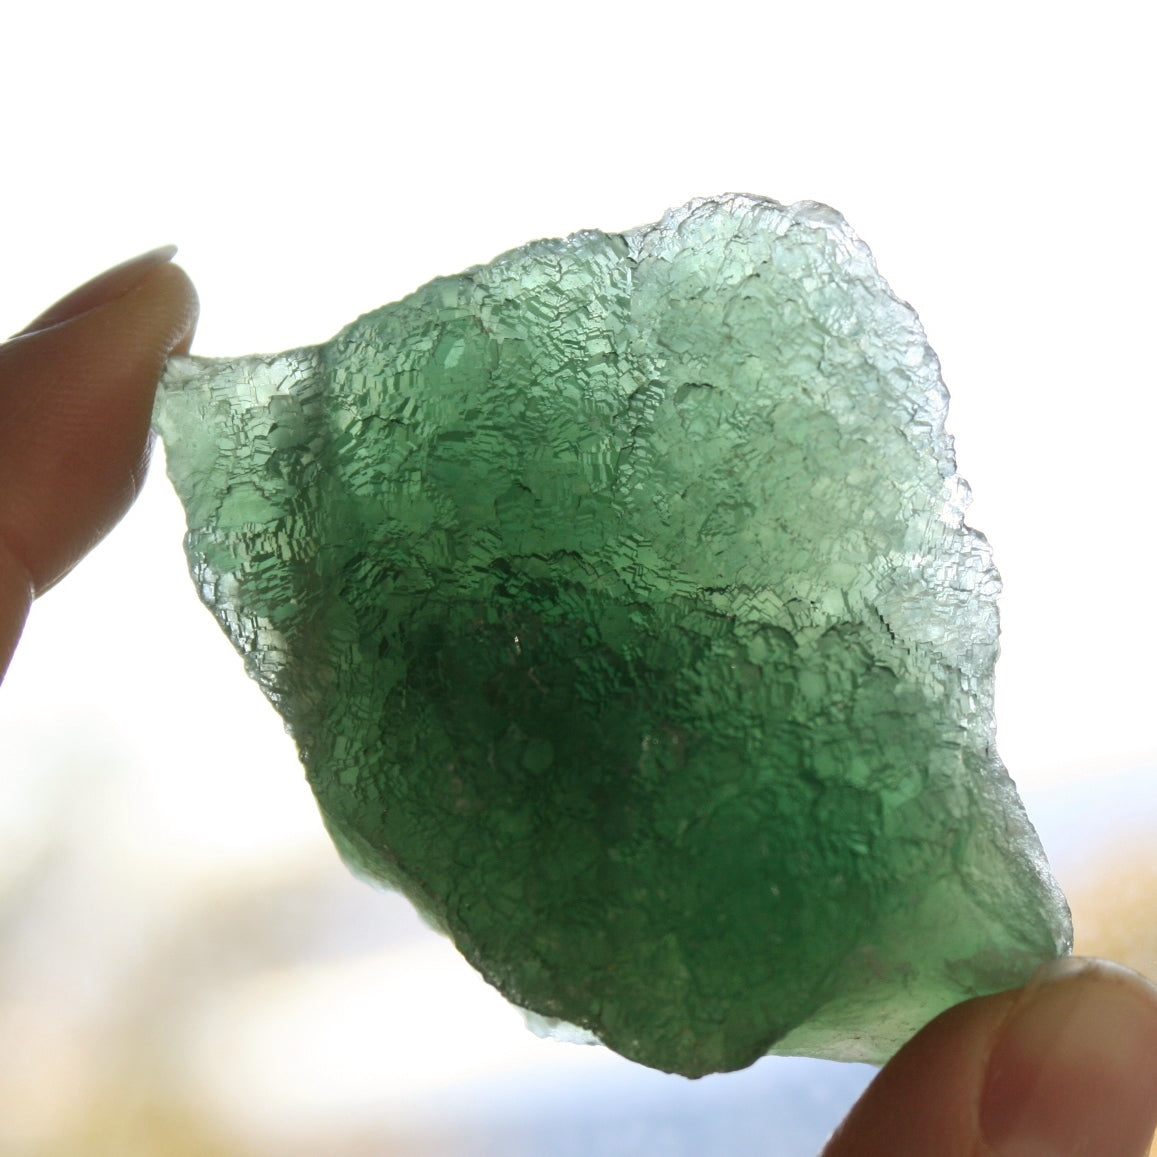 Green Fluorite, Botryoidal Crystal from China, 72.3 grams